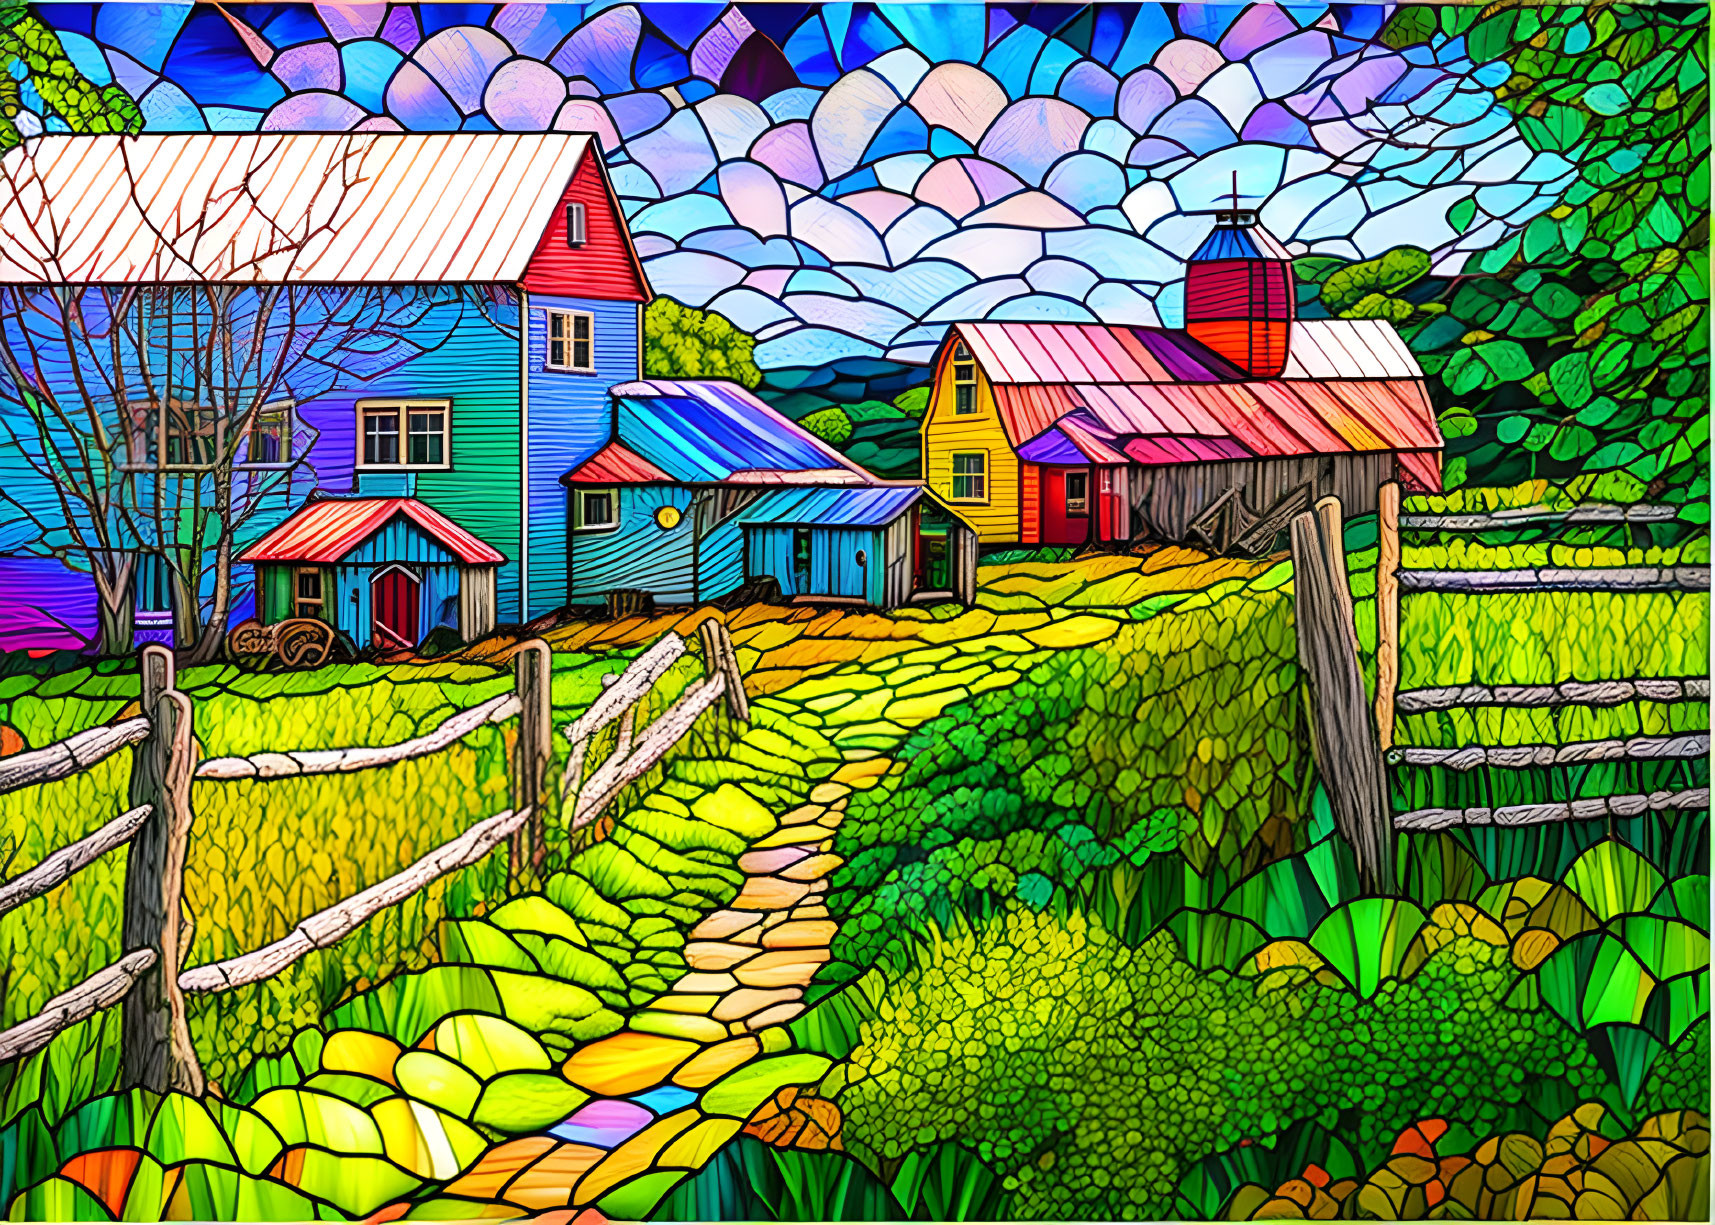 Vibrant rural landscape illustration with colorful houses and whimsical clouds